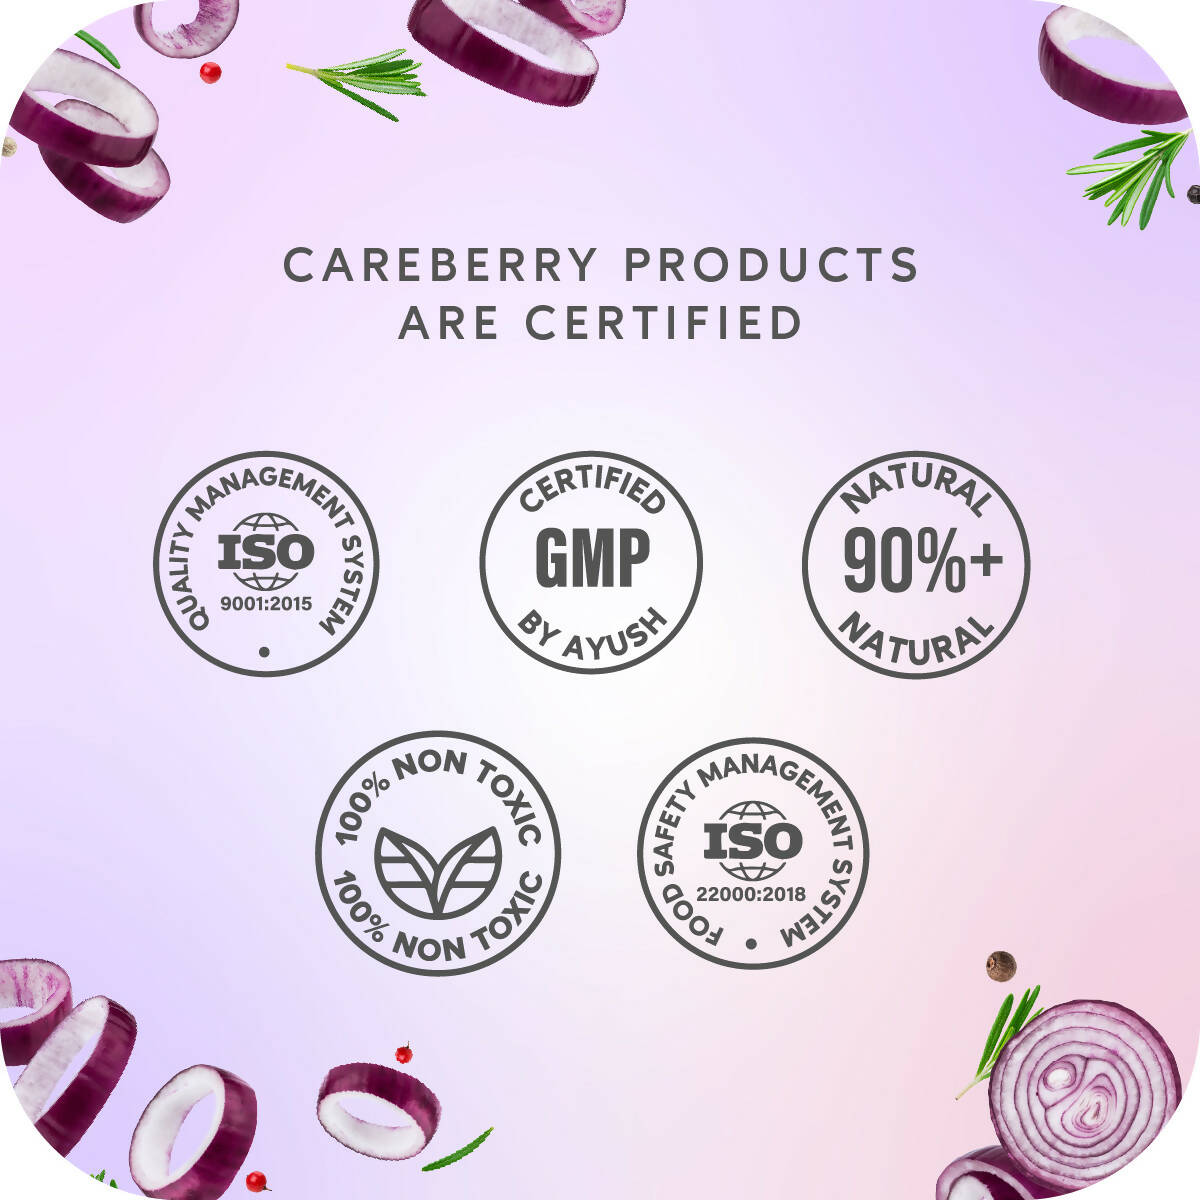 Careberry Organic Red Onion & Black Seed Oil Shampoo + Conditioner For Anti Hair Fall - Distacart